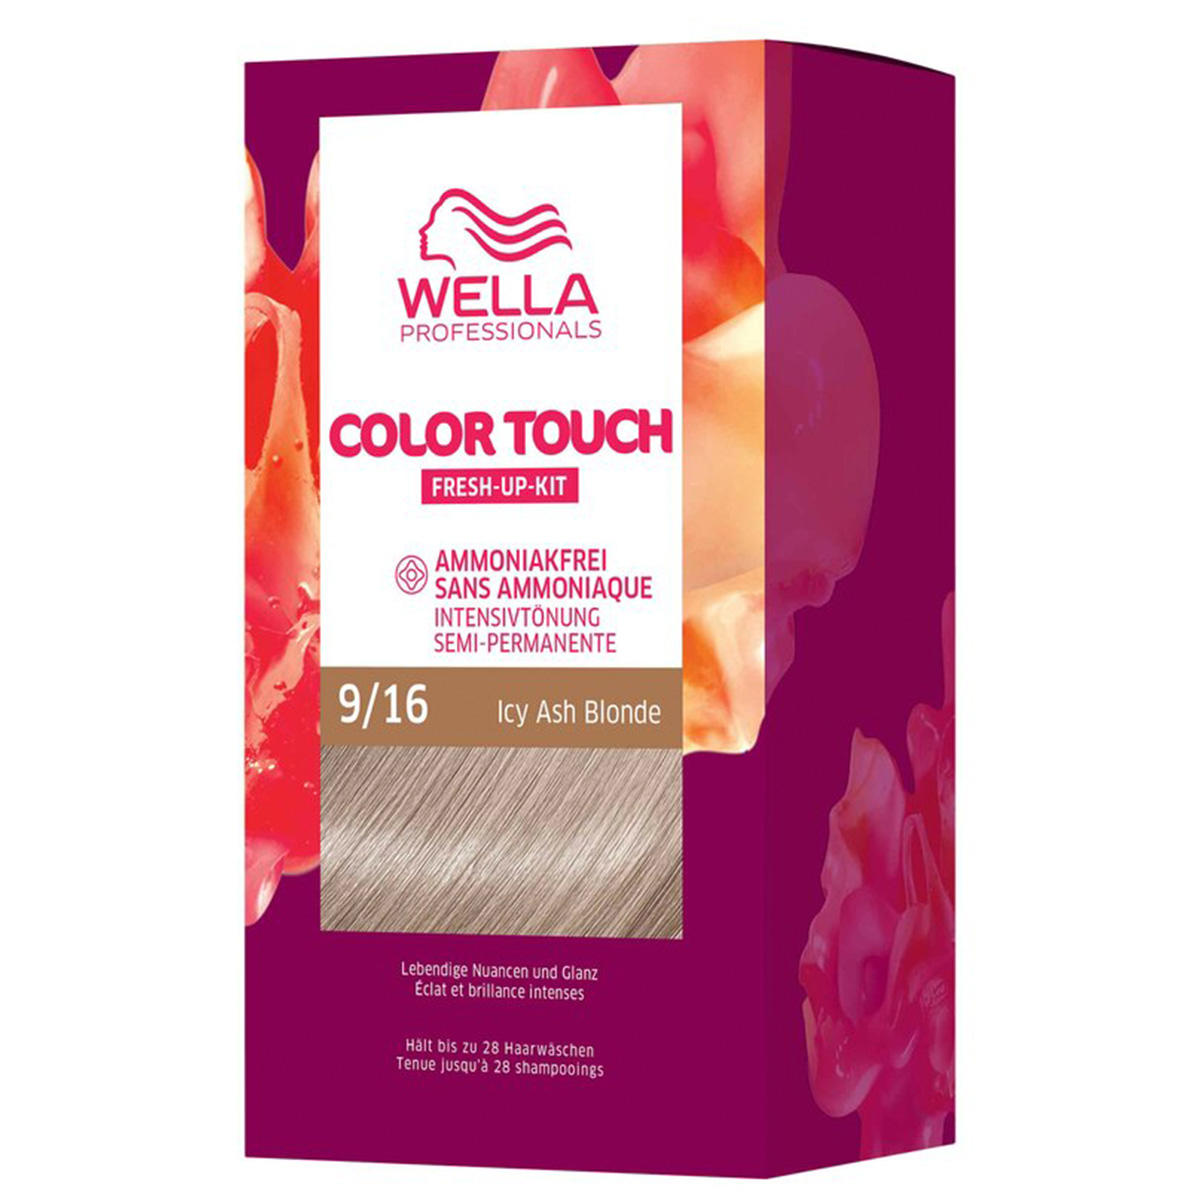 Wella Color Touch Fresh-Up-Kit 9/16 Icy Ash Blonde - 1